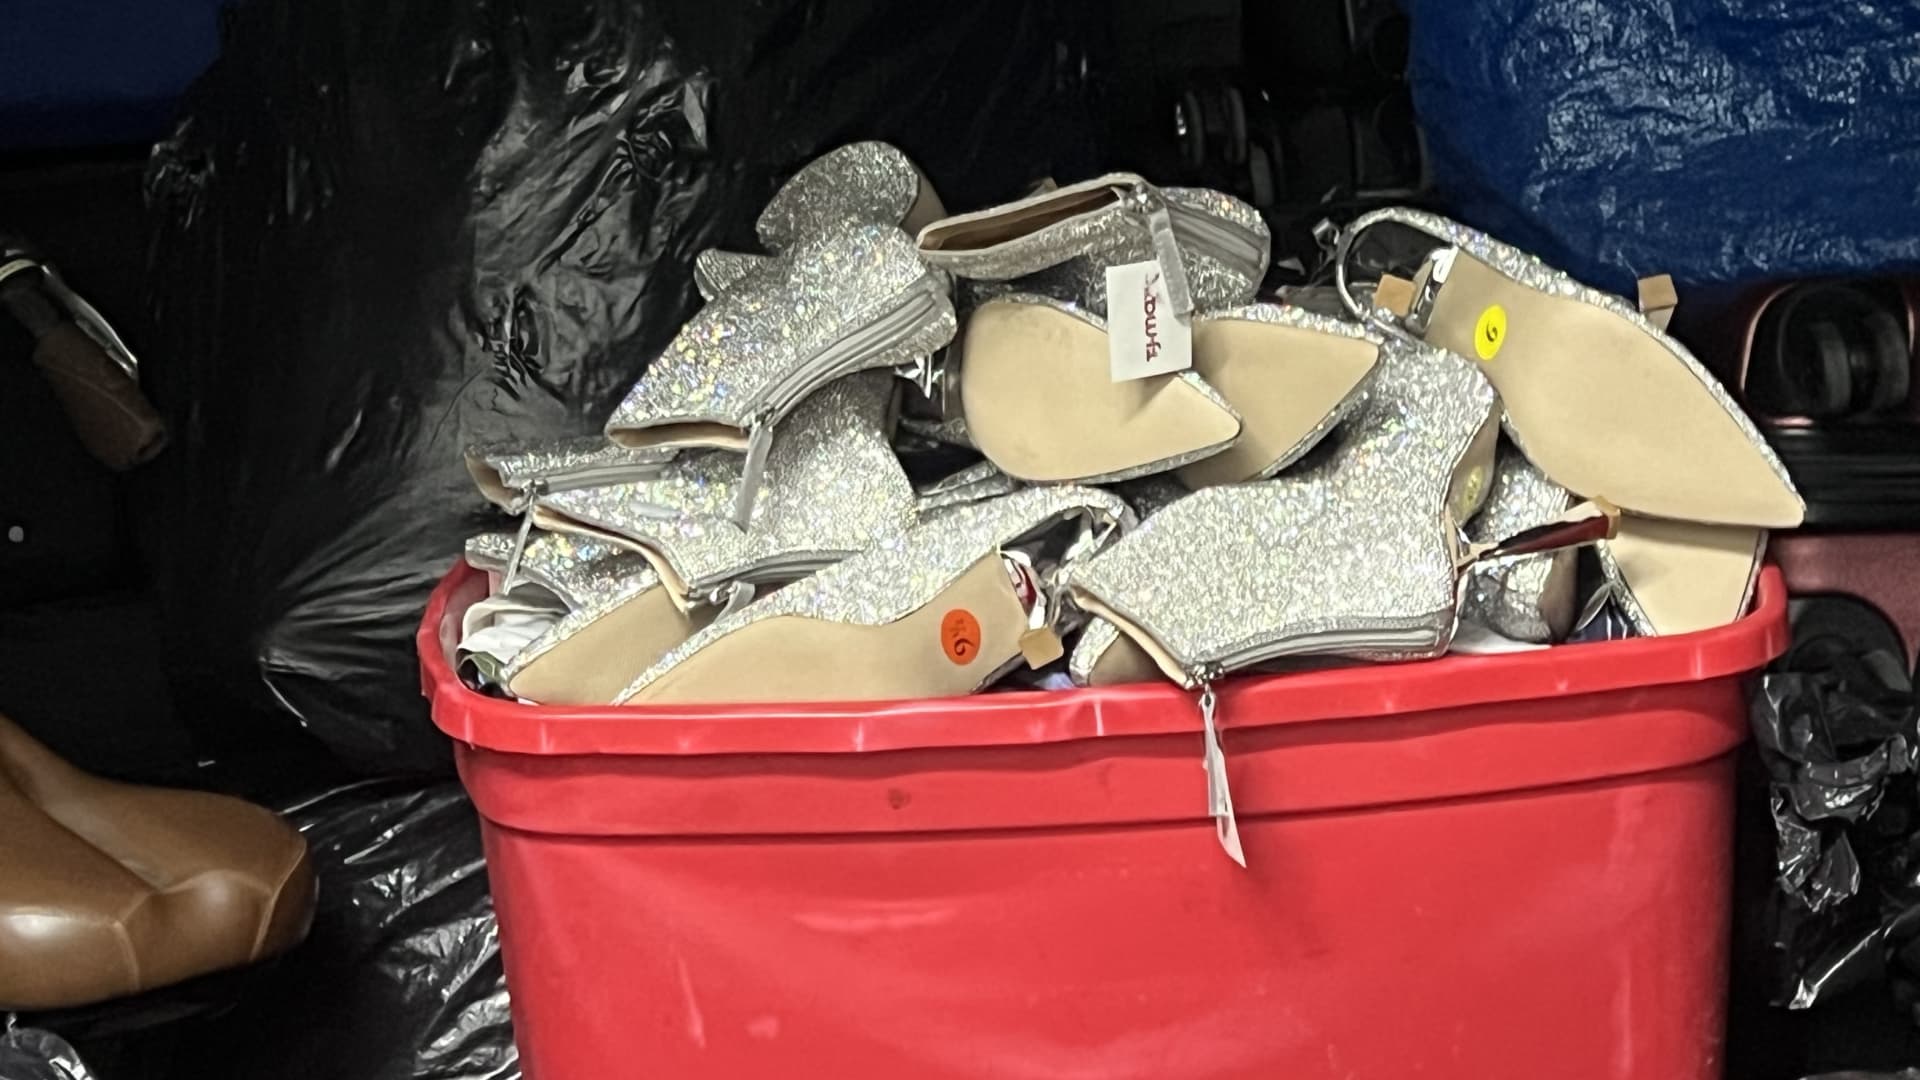 A bin filled with sparkly silver boots that police suspect an alleged San Jose, California, crime ring stole from T.J. Maxx.